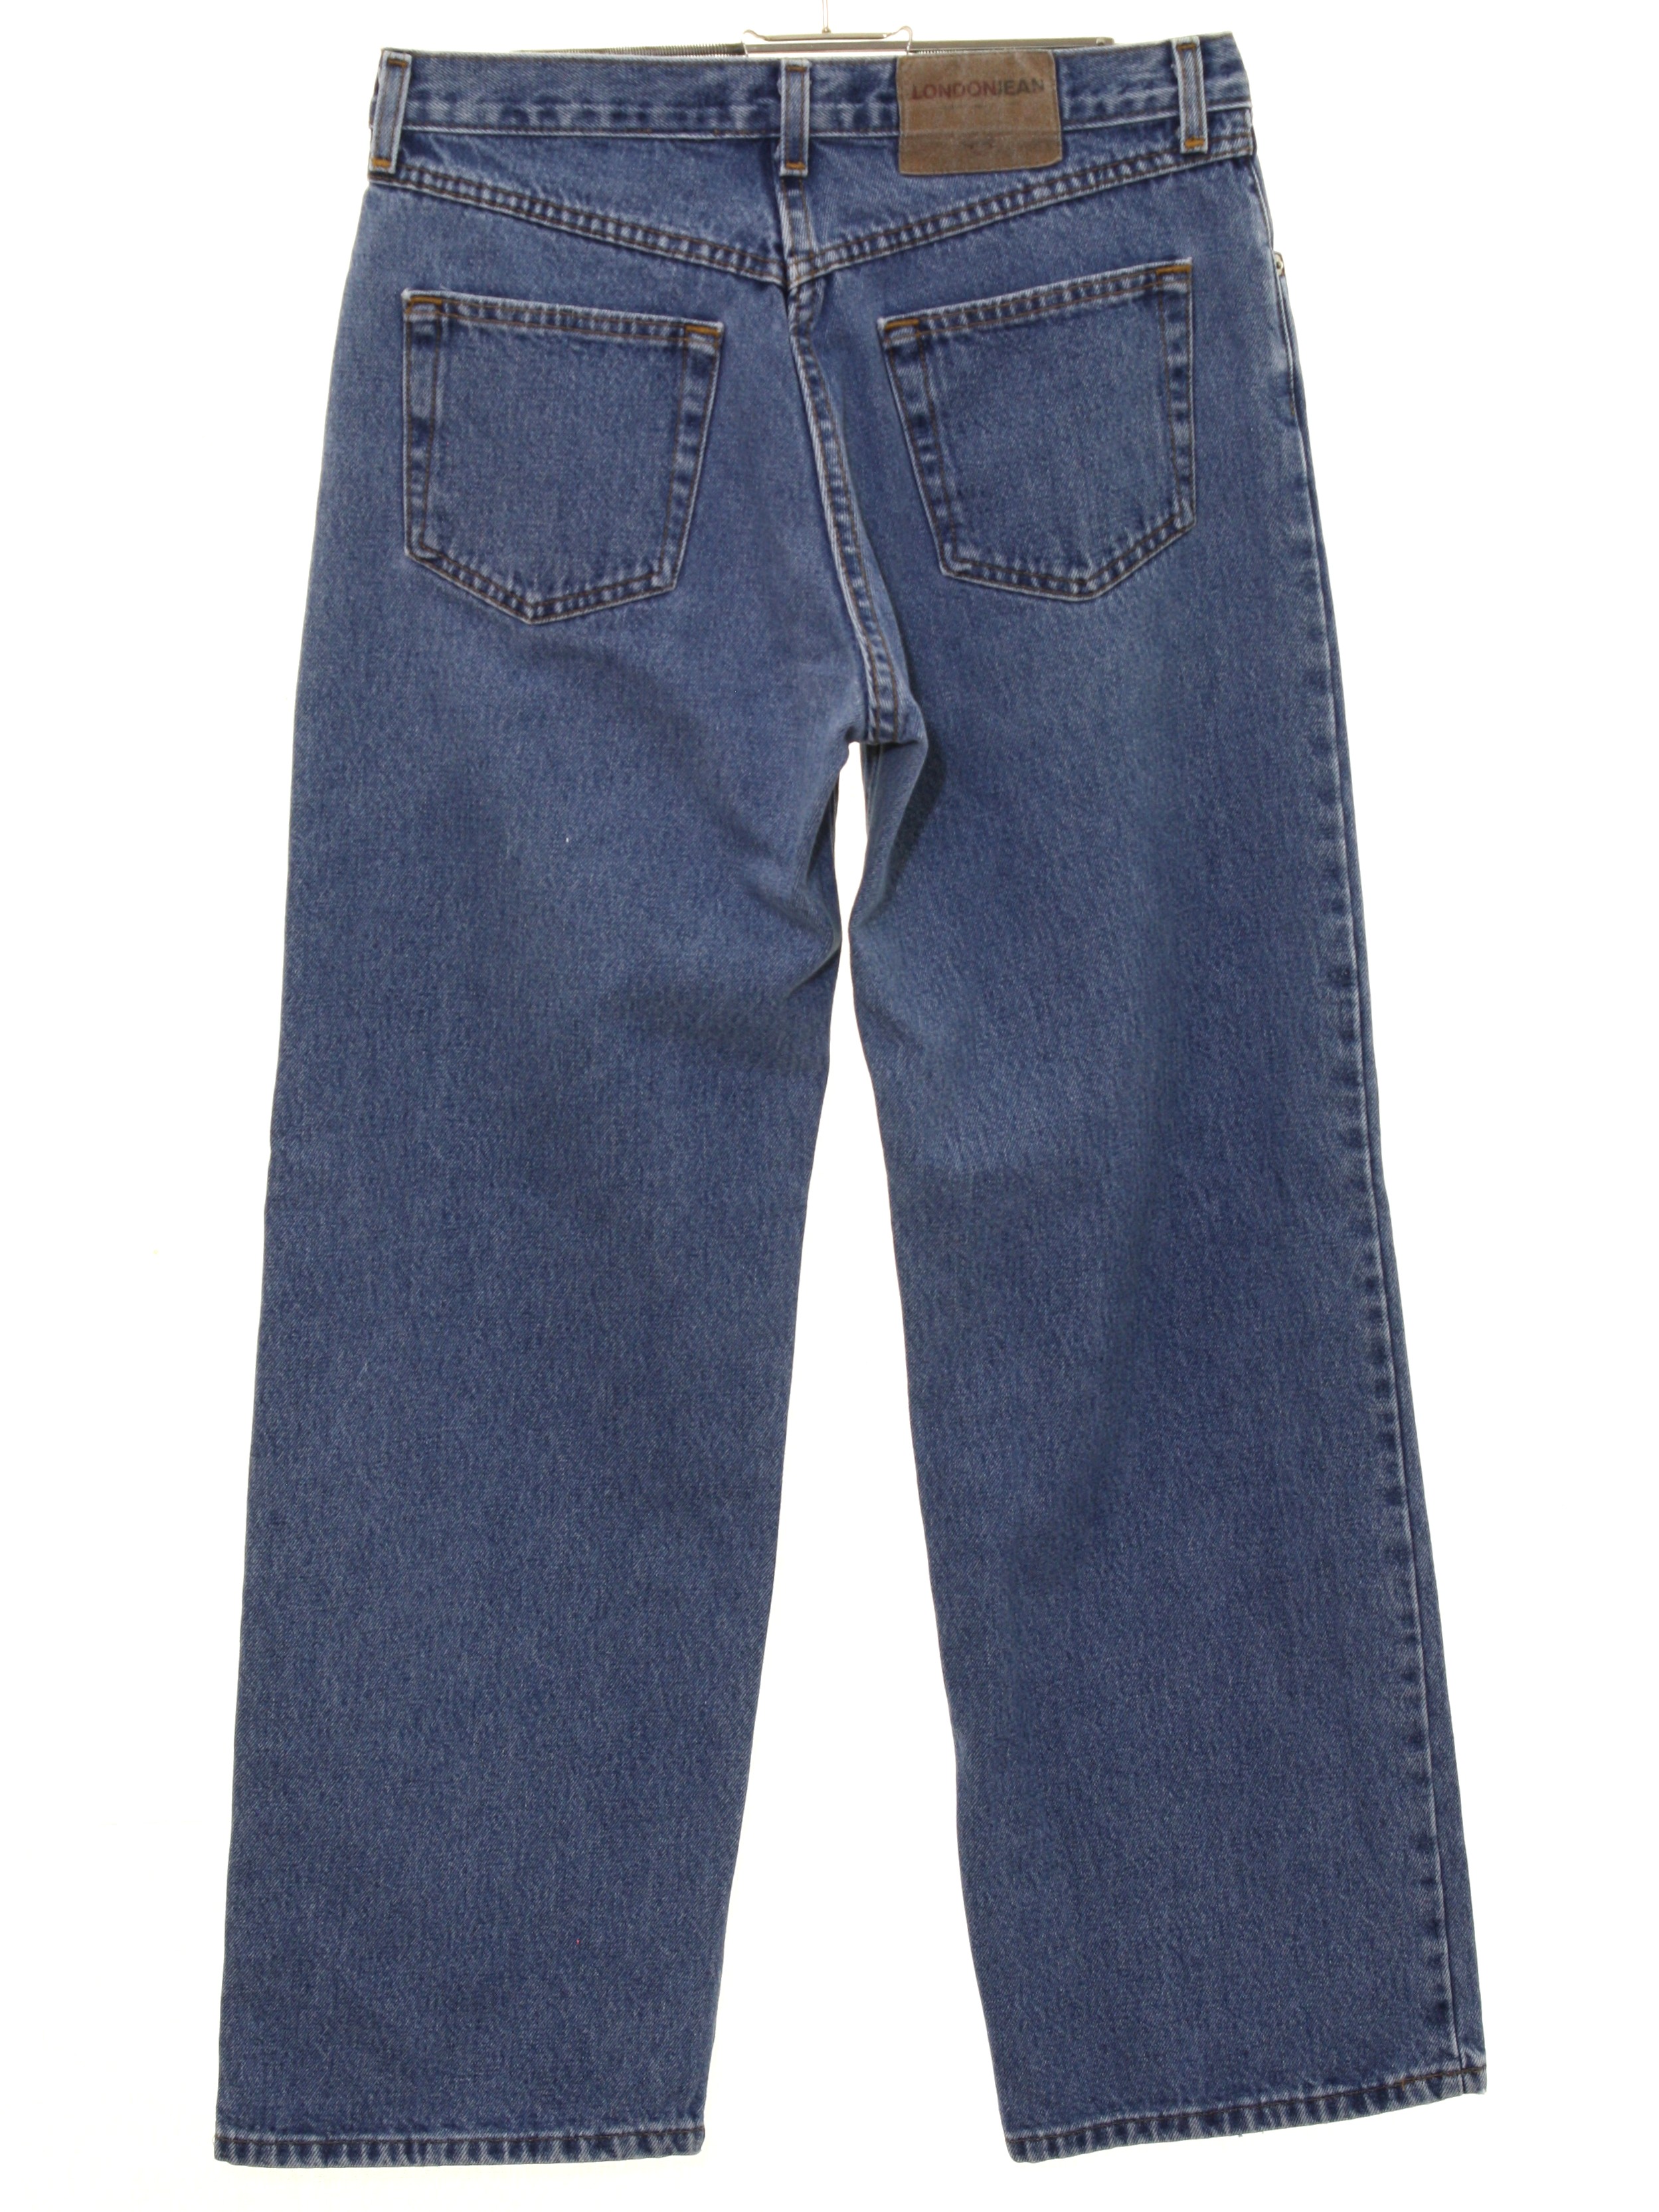 1990s London Jean Flared Pants / Flares: Late 90s -London Jean- Womens ...